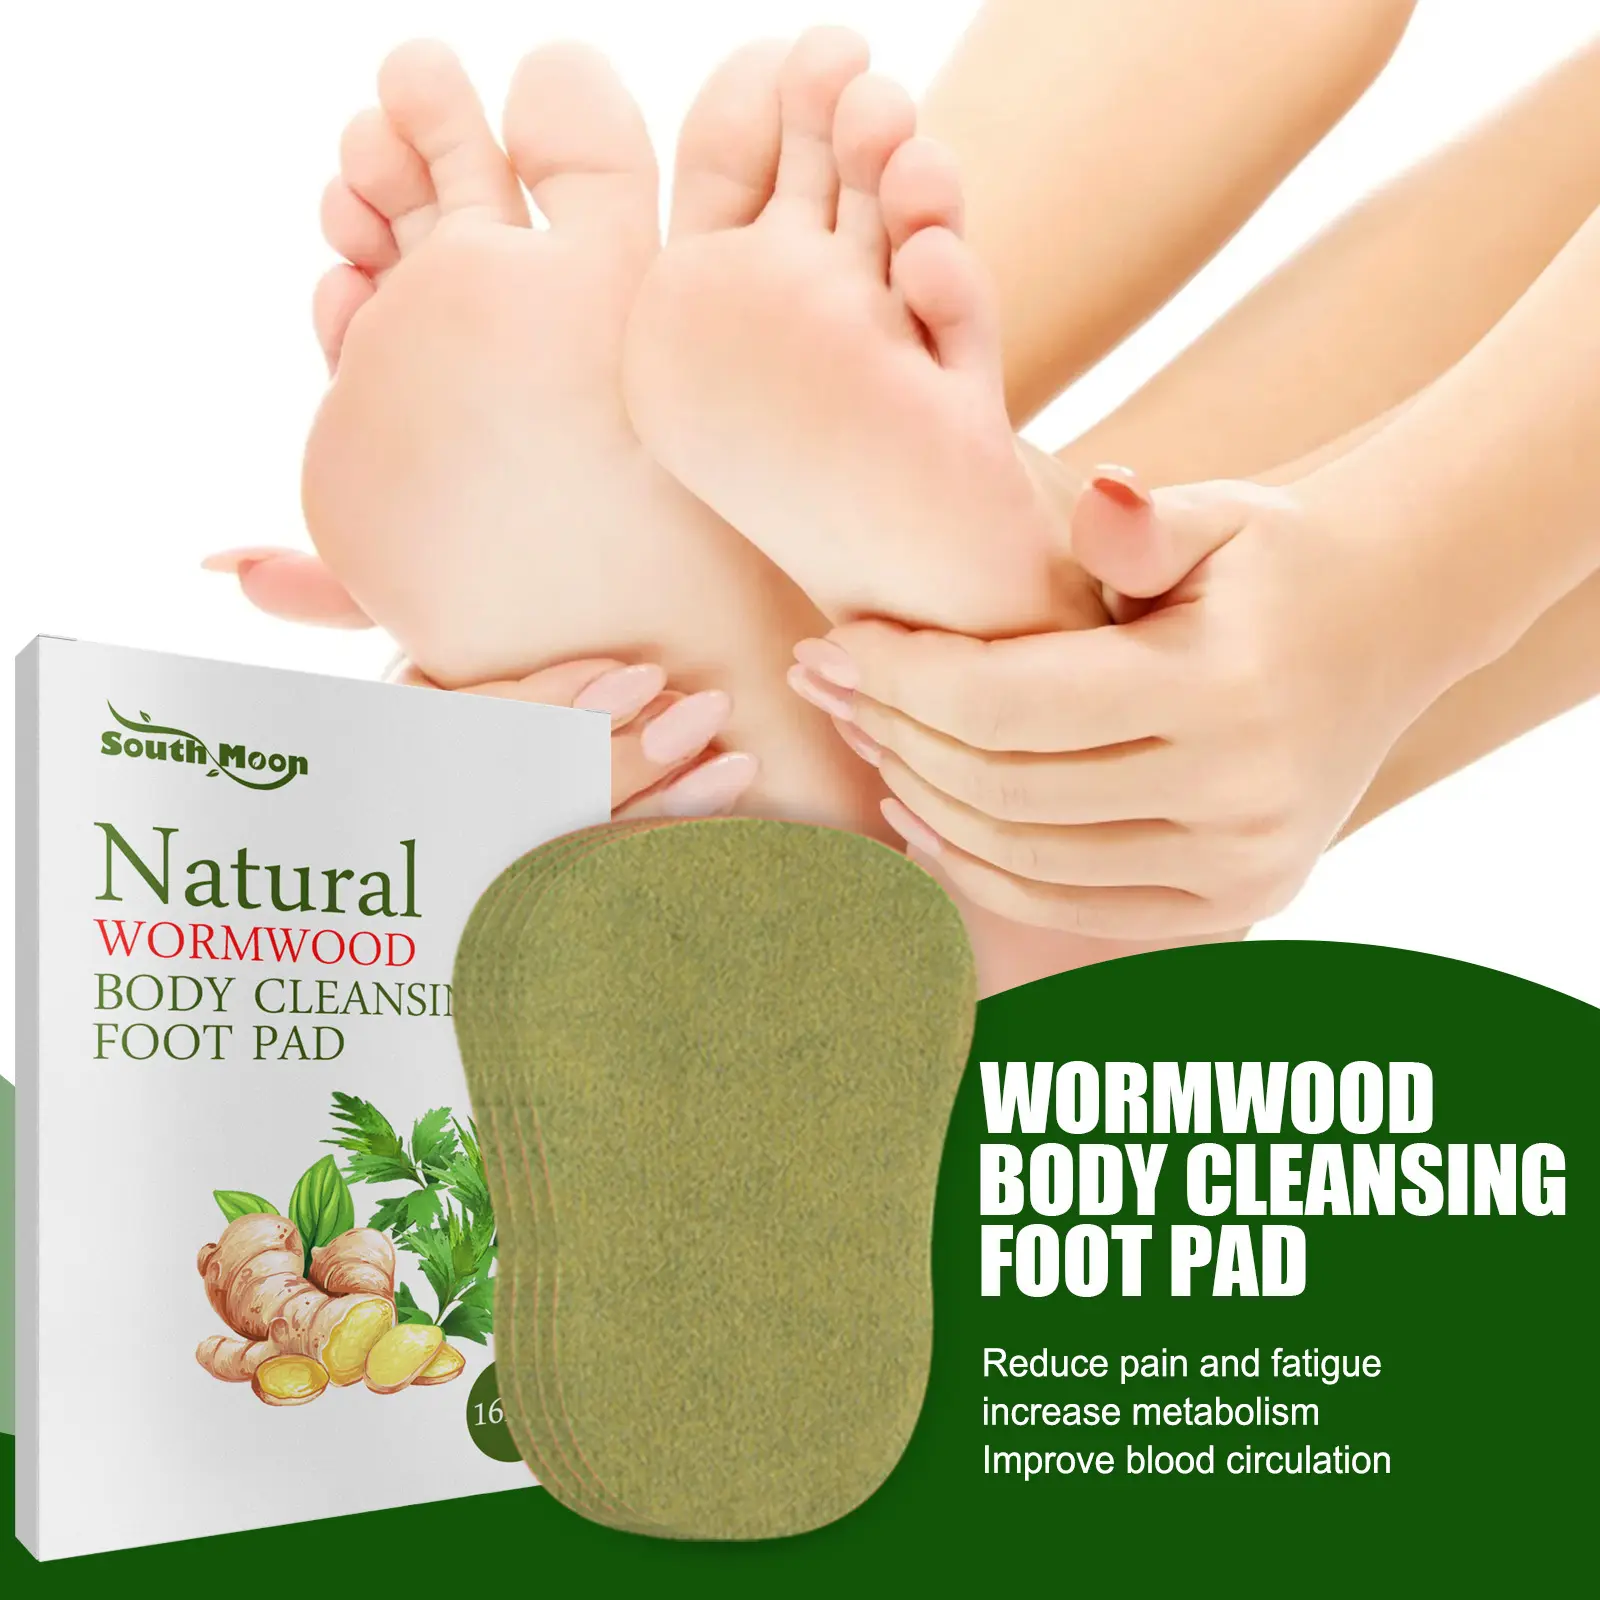 South Moon Weight Loss Slim Patch Wormwood Detox Foot Sticker For Detoxify Toxins Help Sleeping Relieve stress Body Slimming Pro